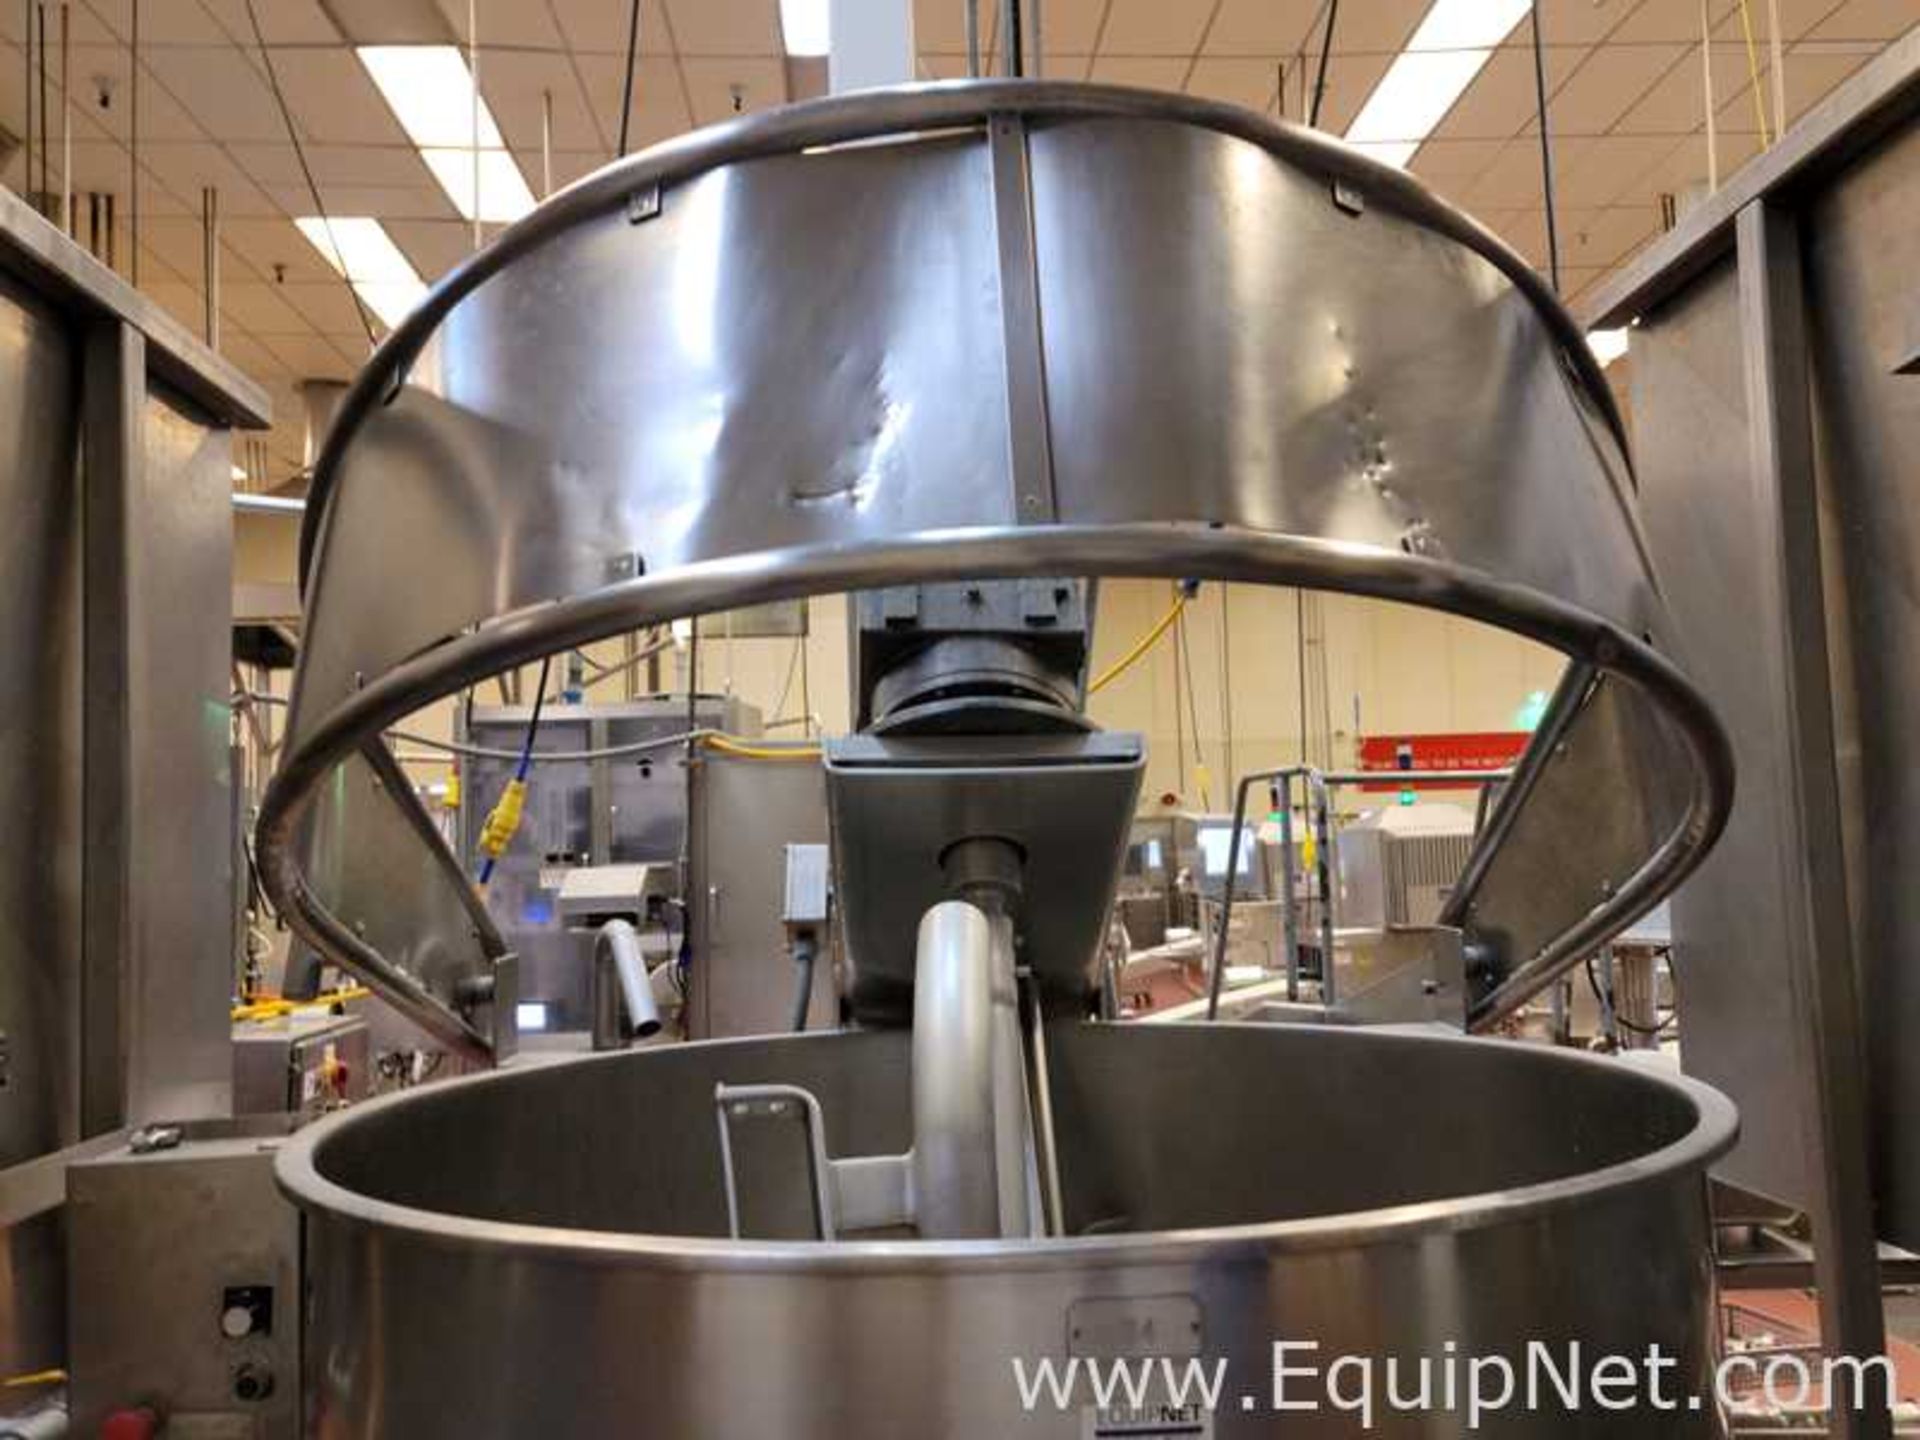 DESCRIPTION: Lee Industries 120 Gallon Stainless Steel Jacketed Kettle with Side Mount AgitationSide - Image 12 of 14